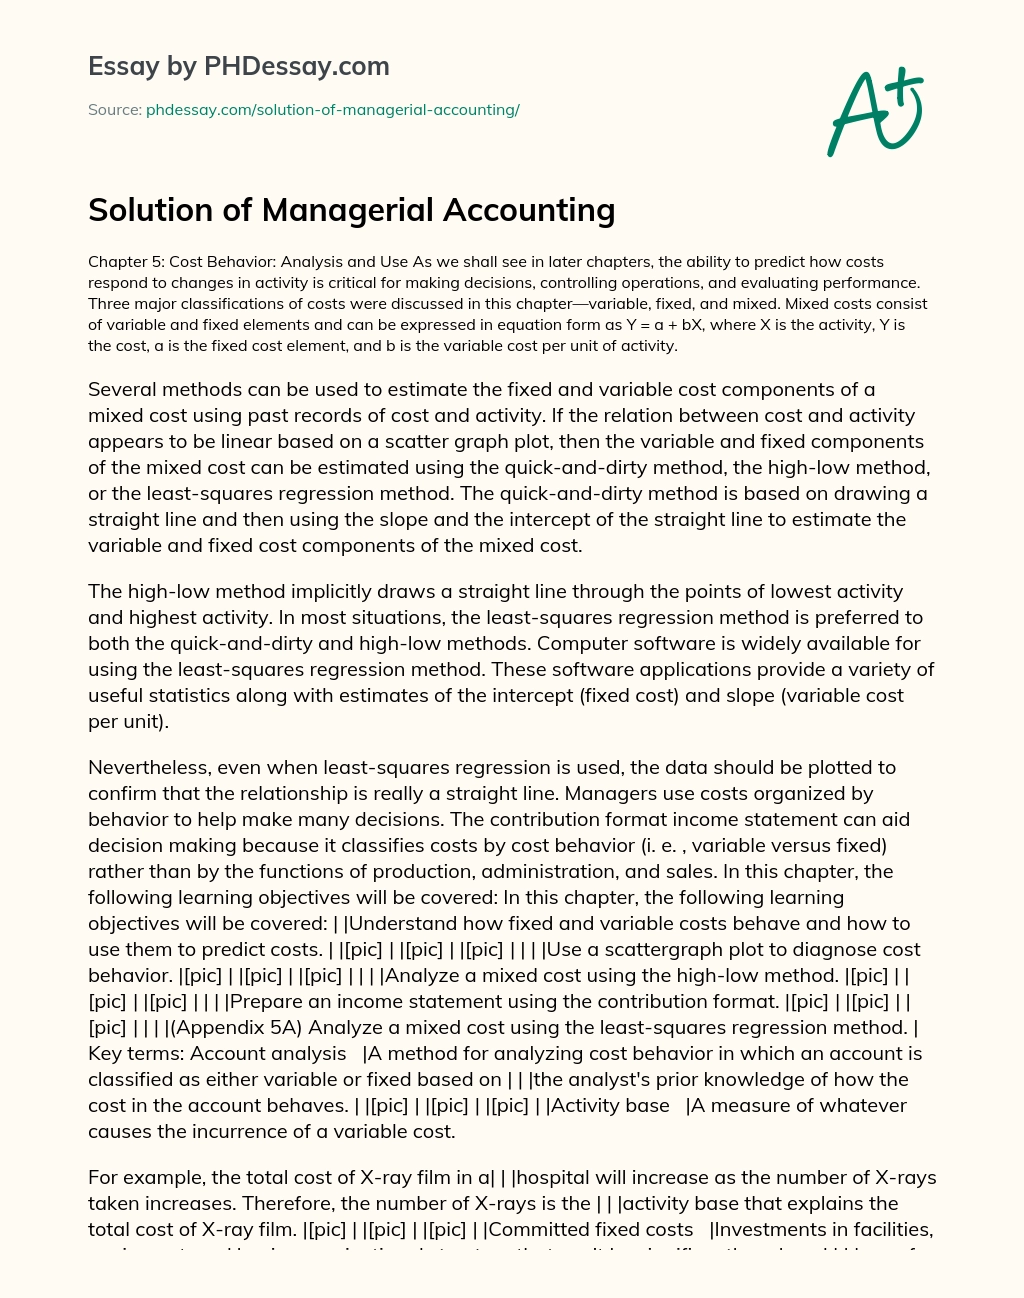 Solution of Managerial Accounting essay